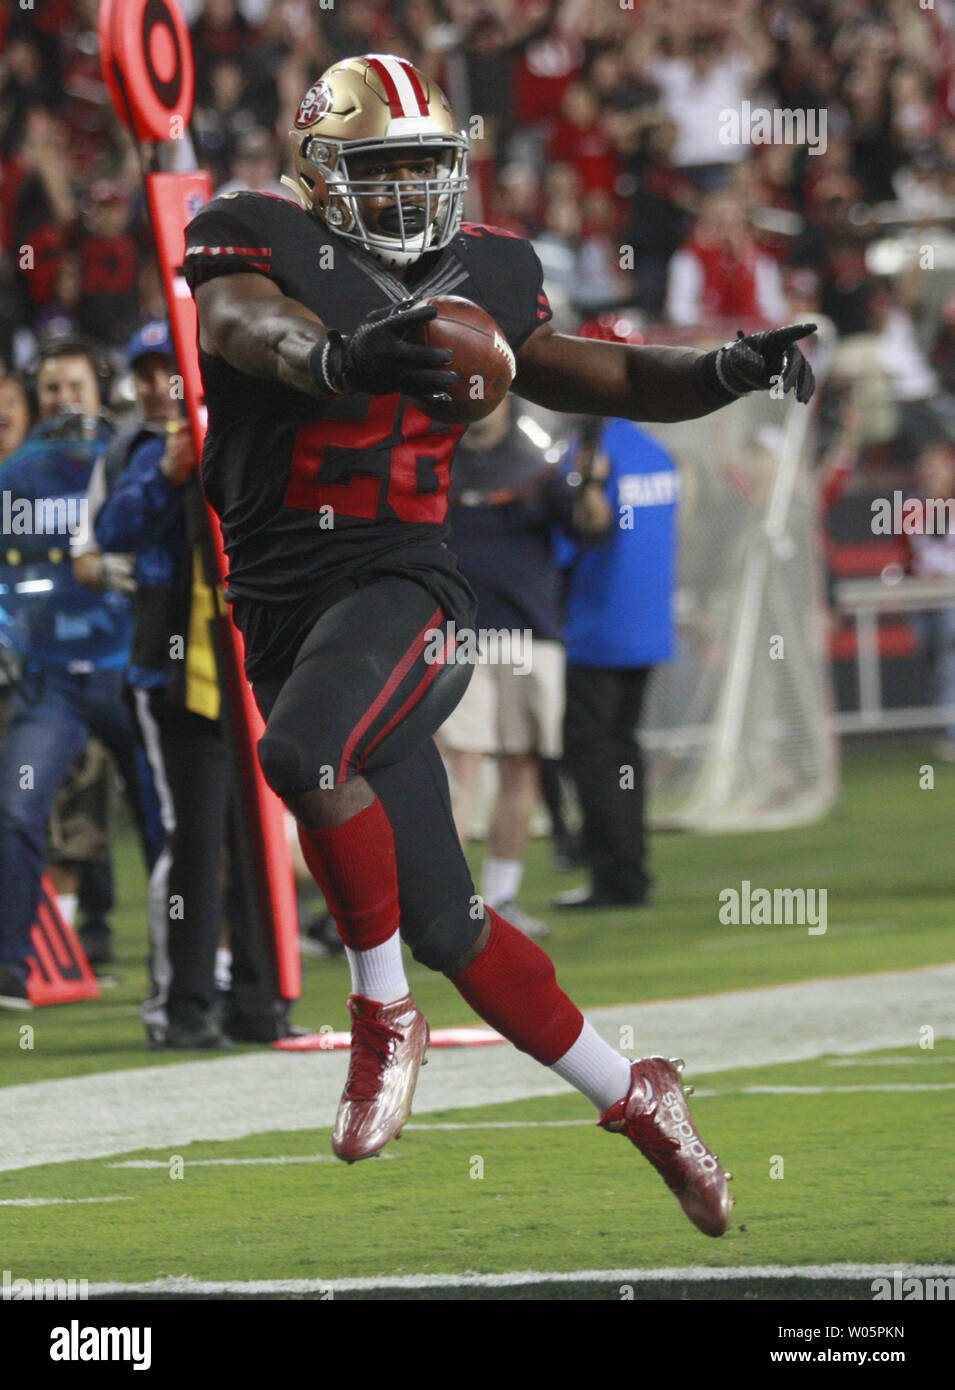 San Francisco 49ers RB Carlos Hyde (28) styles across the goal line with a 17 yard TD against the Minnesota Vikings in the fourth quarter at Levi's Stadium in Santa Clara, California on September 14, 2015. Hyde ran for 168 yards and two touchdowns in the 49ers 20-3 defeat of the Vikings.  Photo by Bruce Gordon/UPI Stock Photo